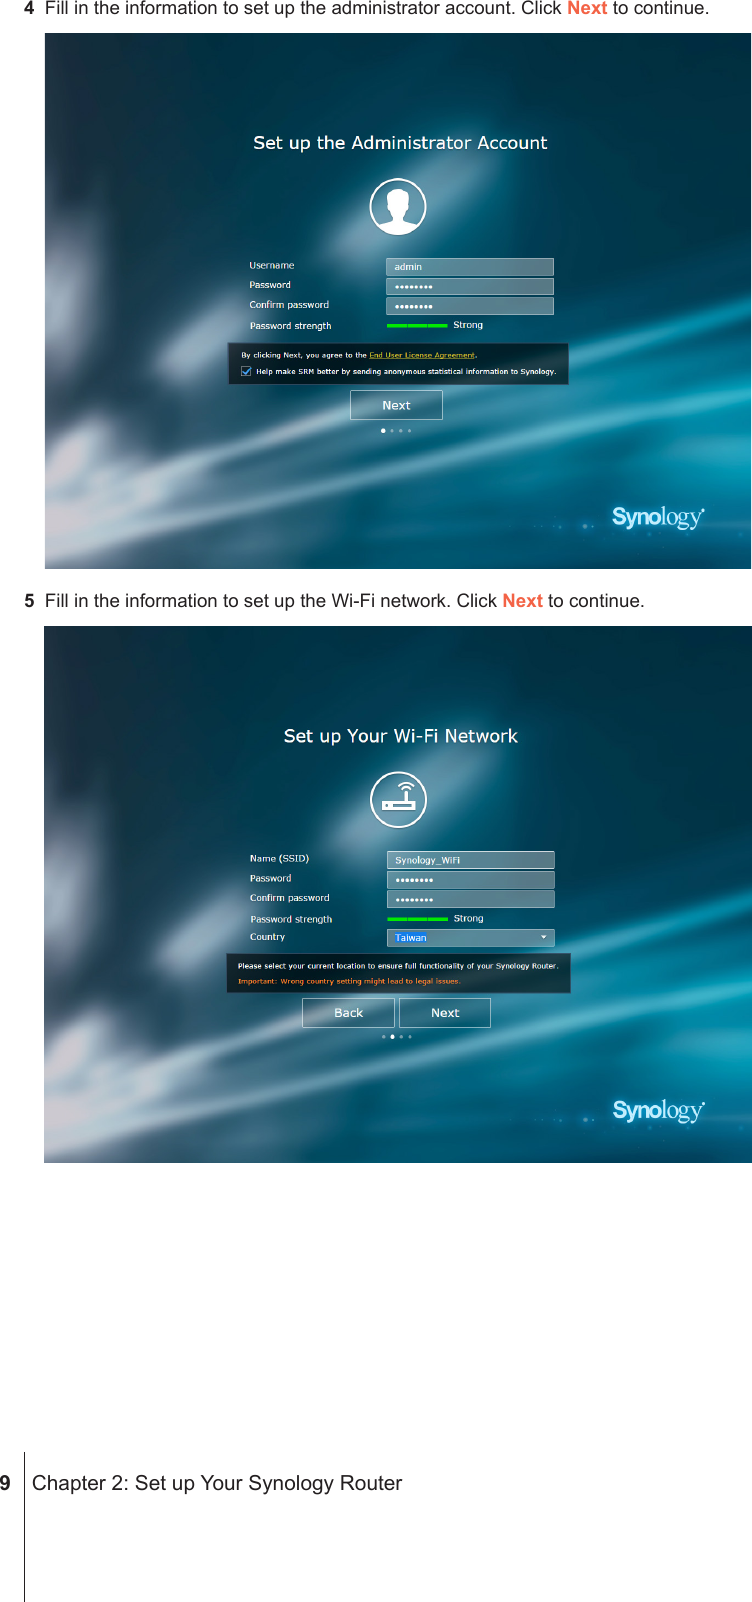  9  Chapter 2: Set up Your Synology Router4  Fill in the information to set up the administrator account. Click Next to continue.5  Fill in the information to set up the Wi-Fi network. Click Next to continue.